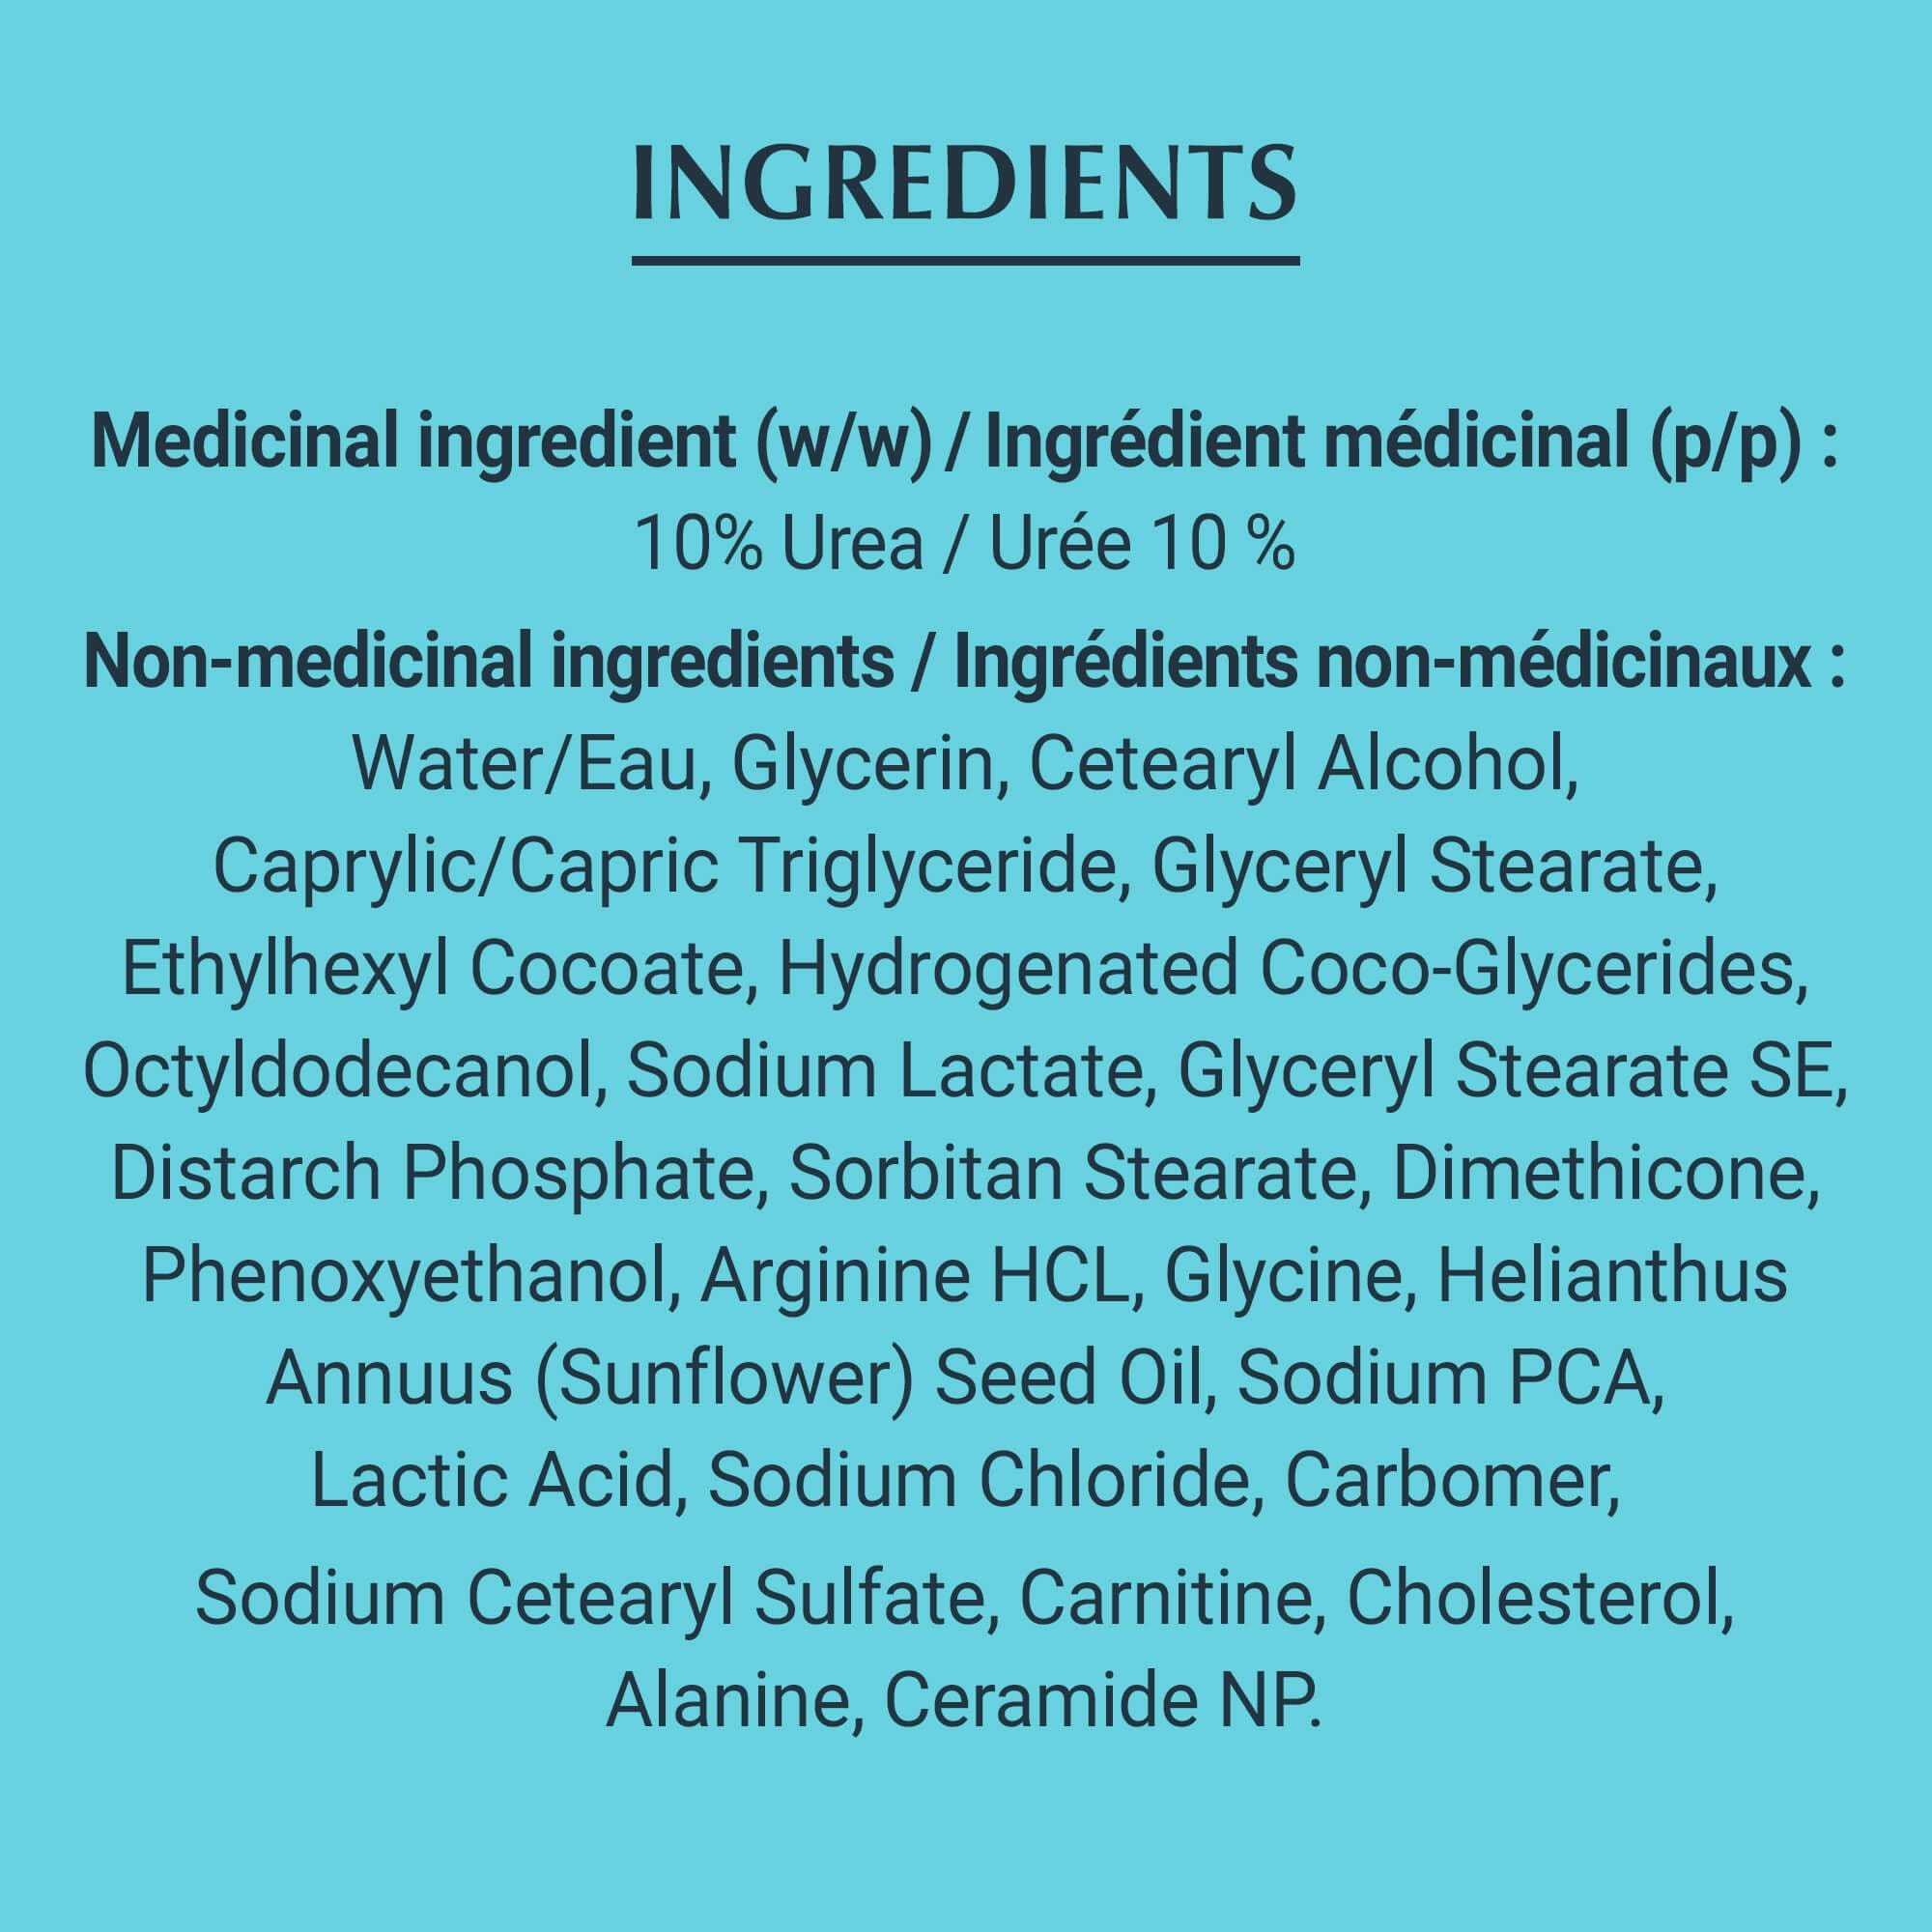 Image of The Eucerin Complete Repair Foot Cream Ingredients list on a bright teal background.